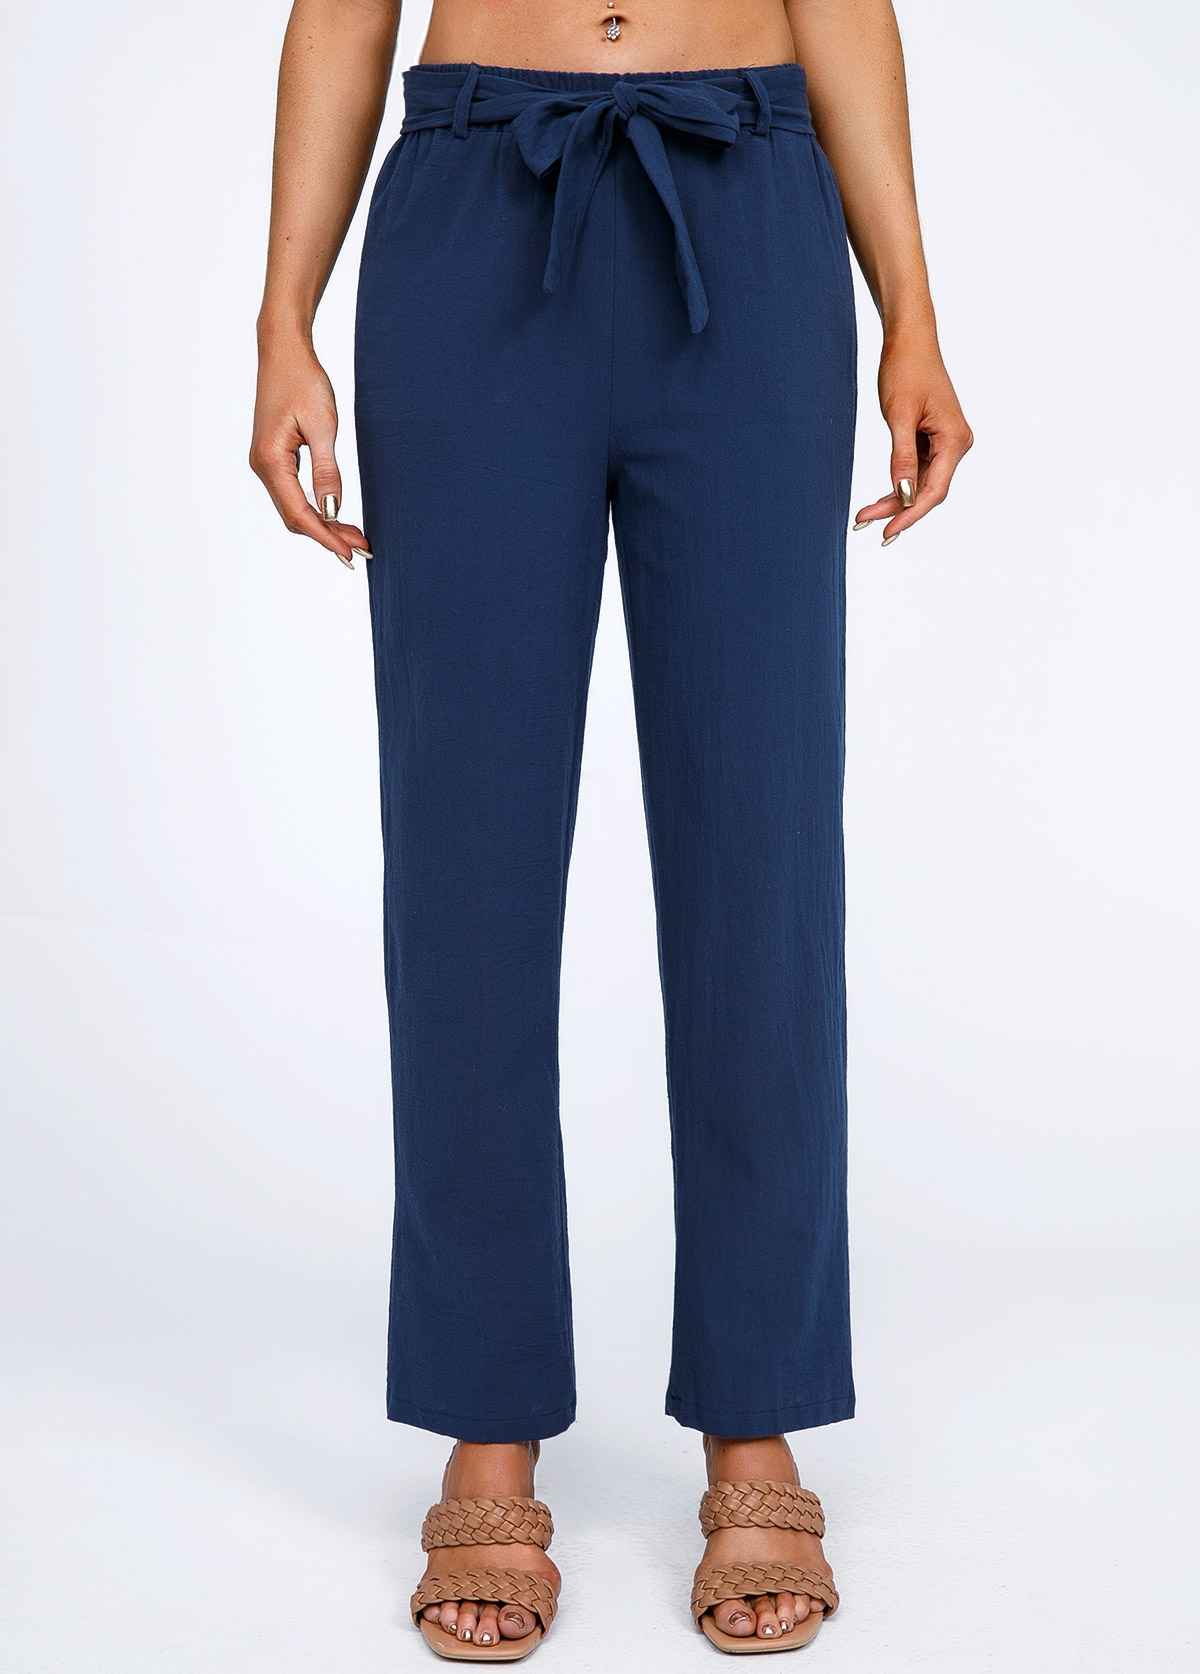 Bowknot Navy Belted High Waisted Pants